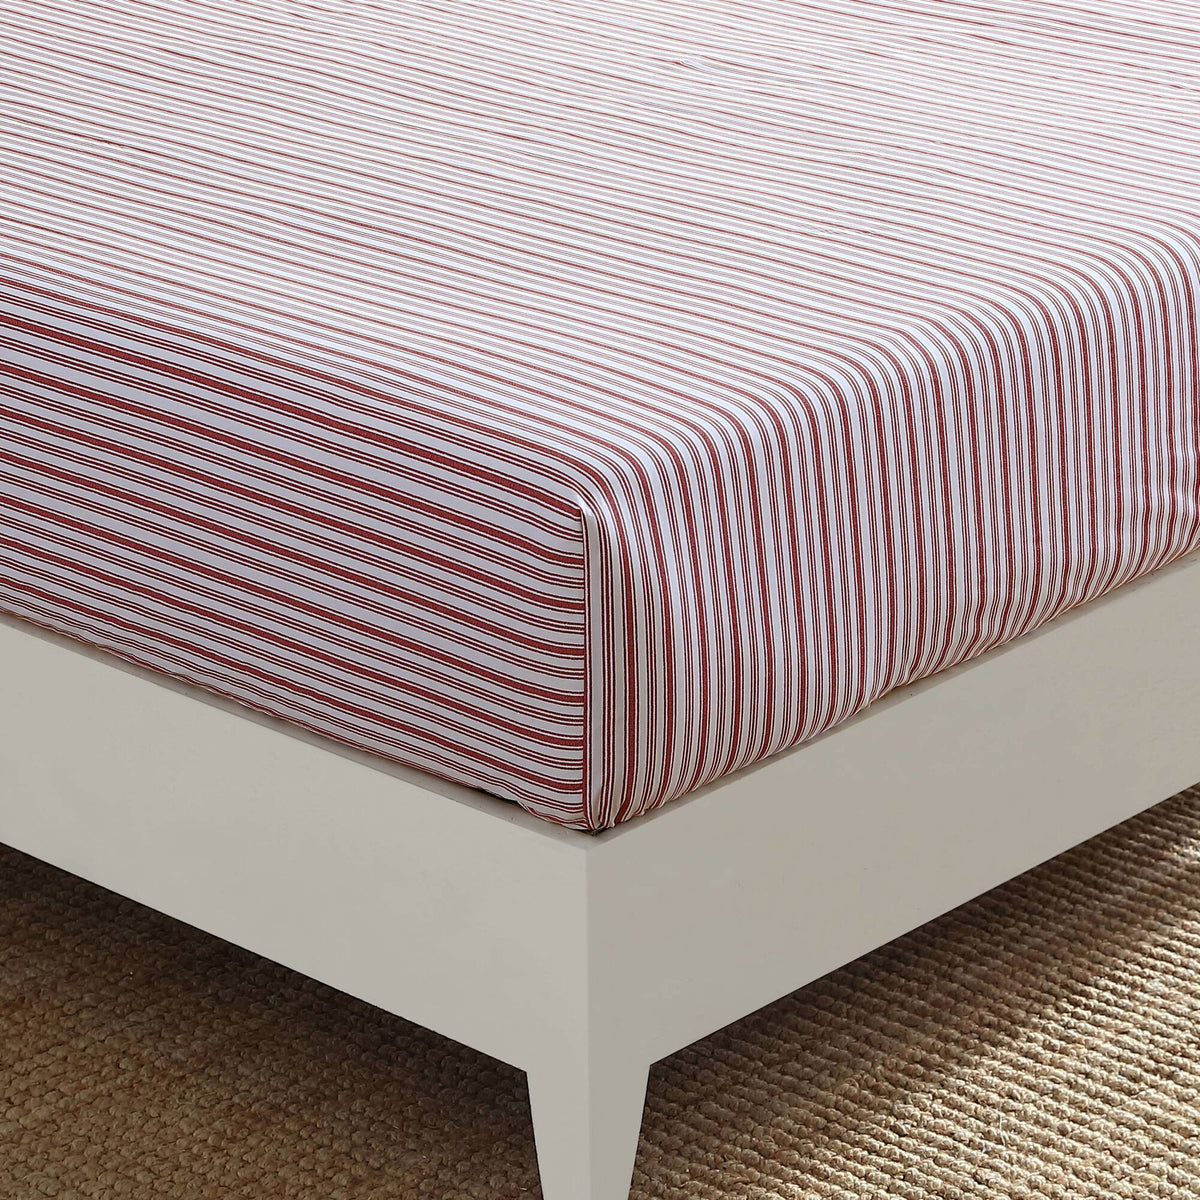 Nautica Coleridge Striped Red Twin Fitted Sheet Pale Orchid